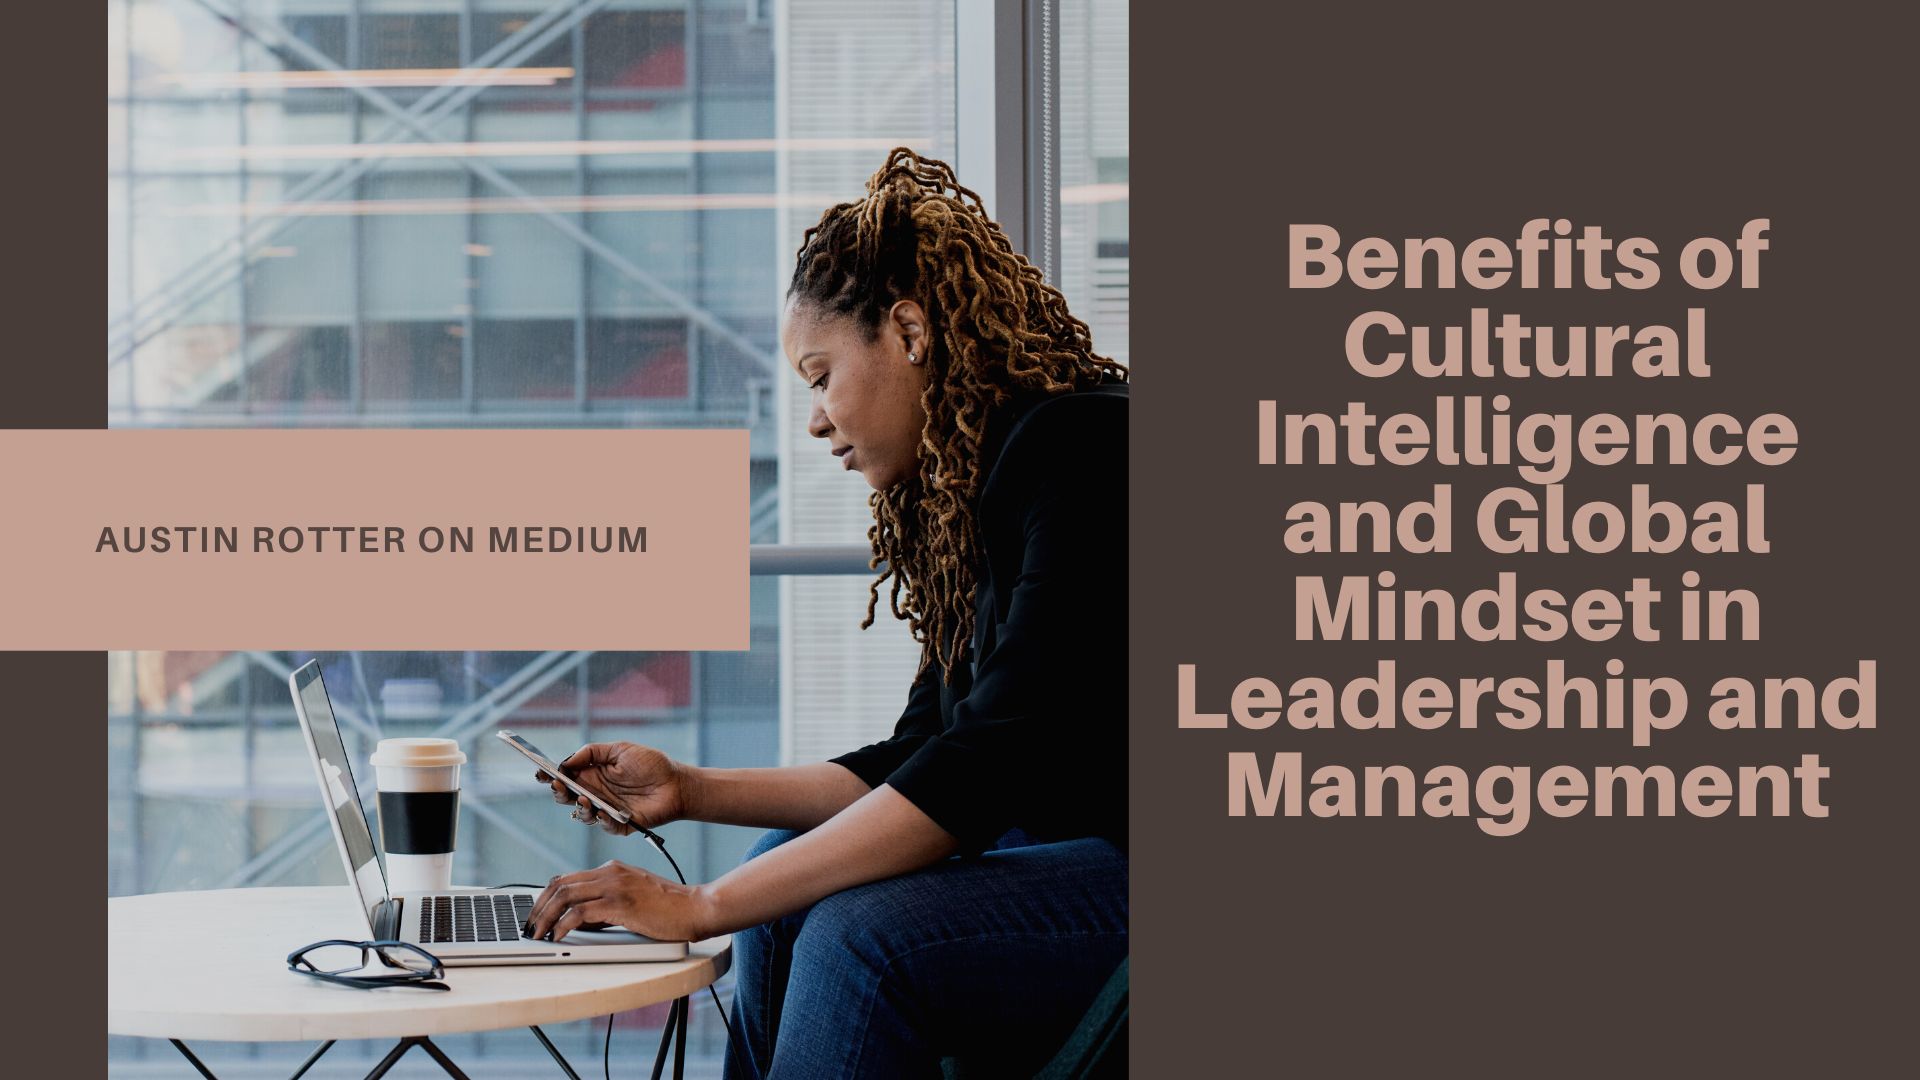 Benefits of
Cultural
Intelligence
and Global
Mindsetin
Leadership and
Management